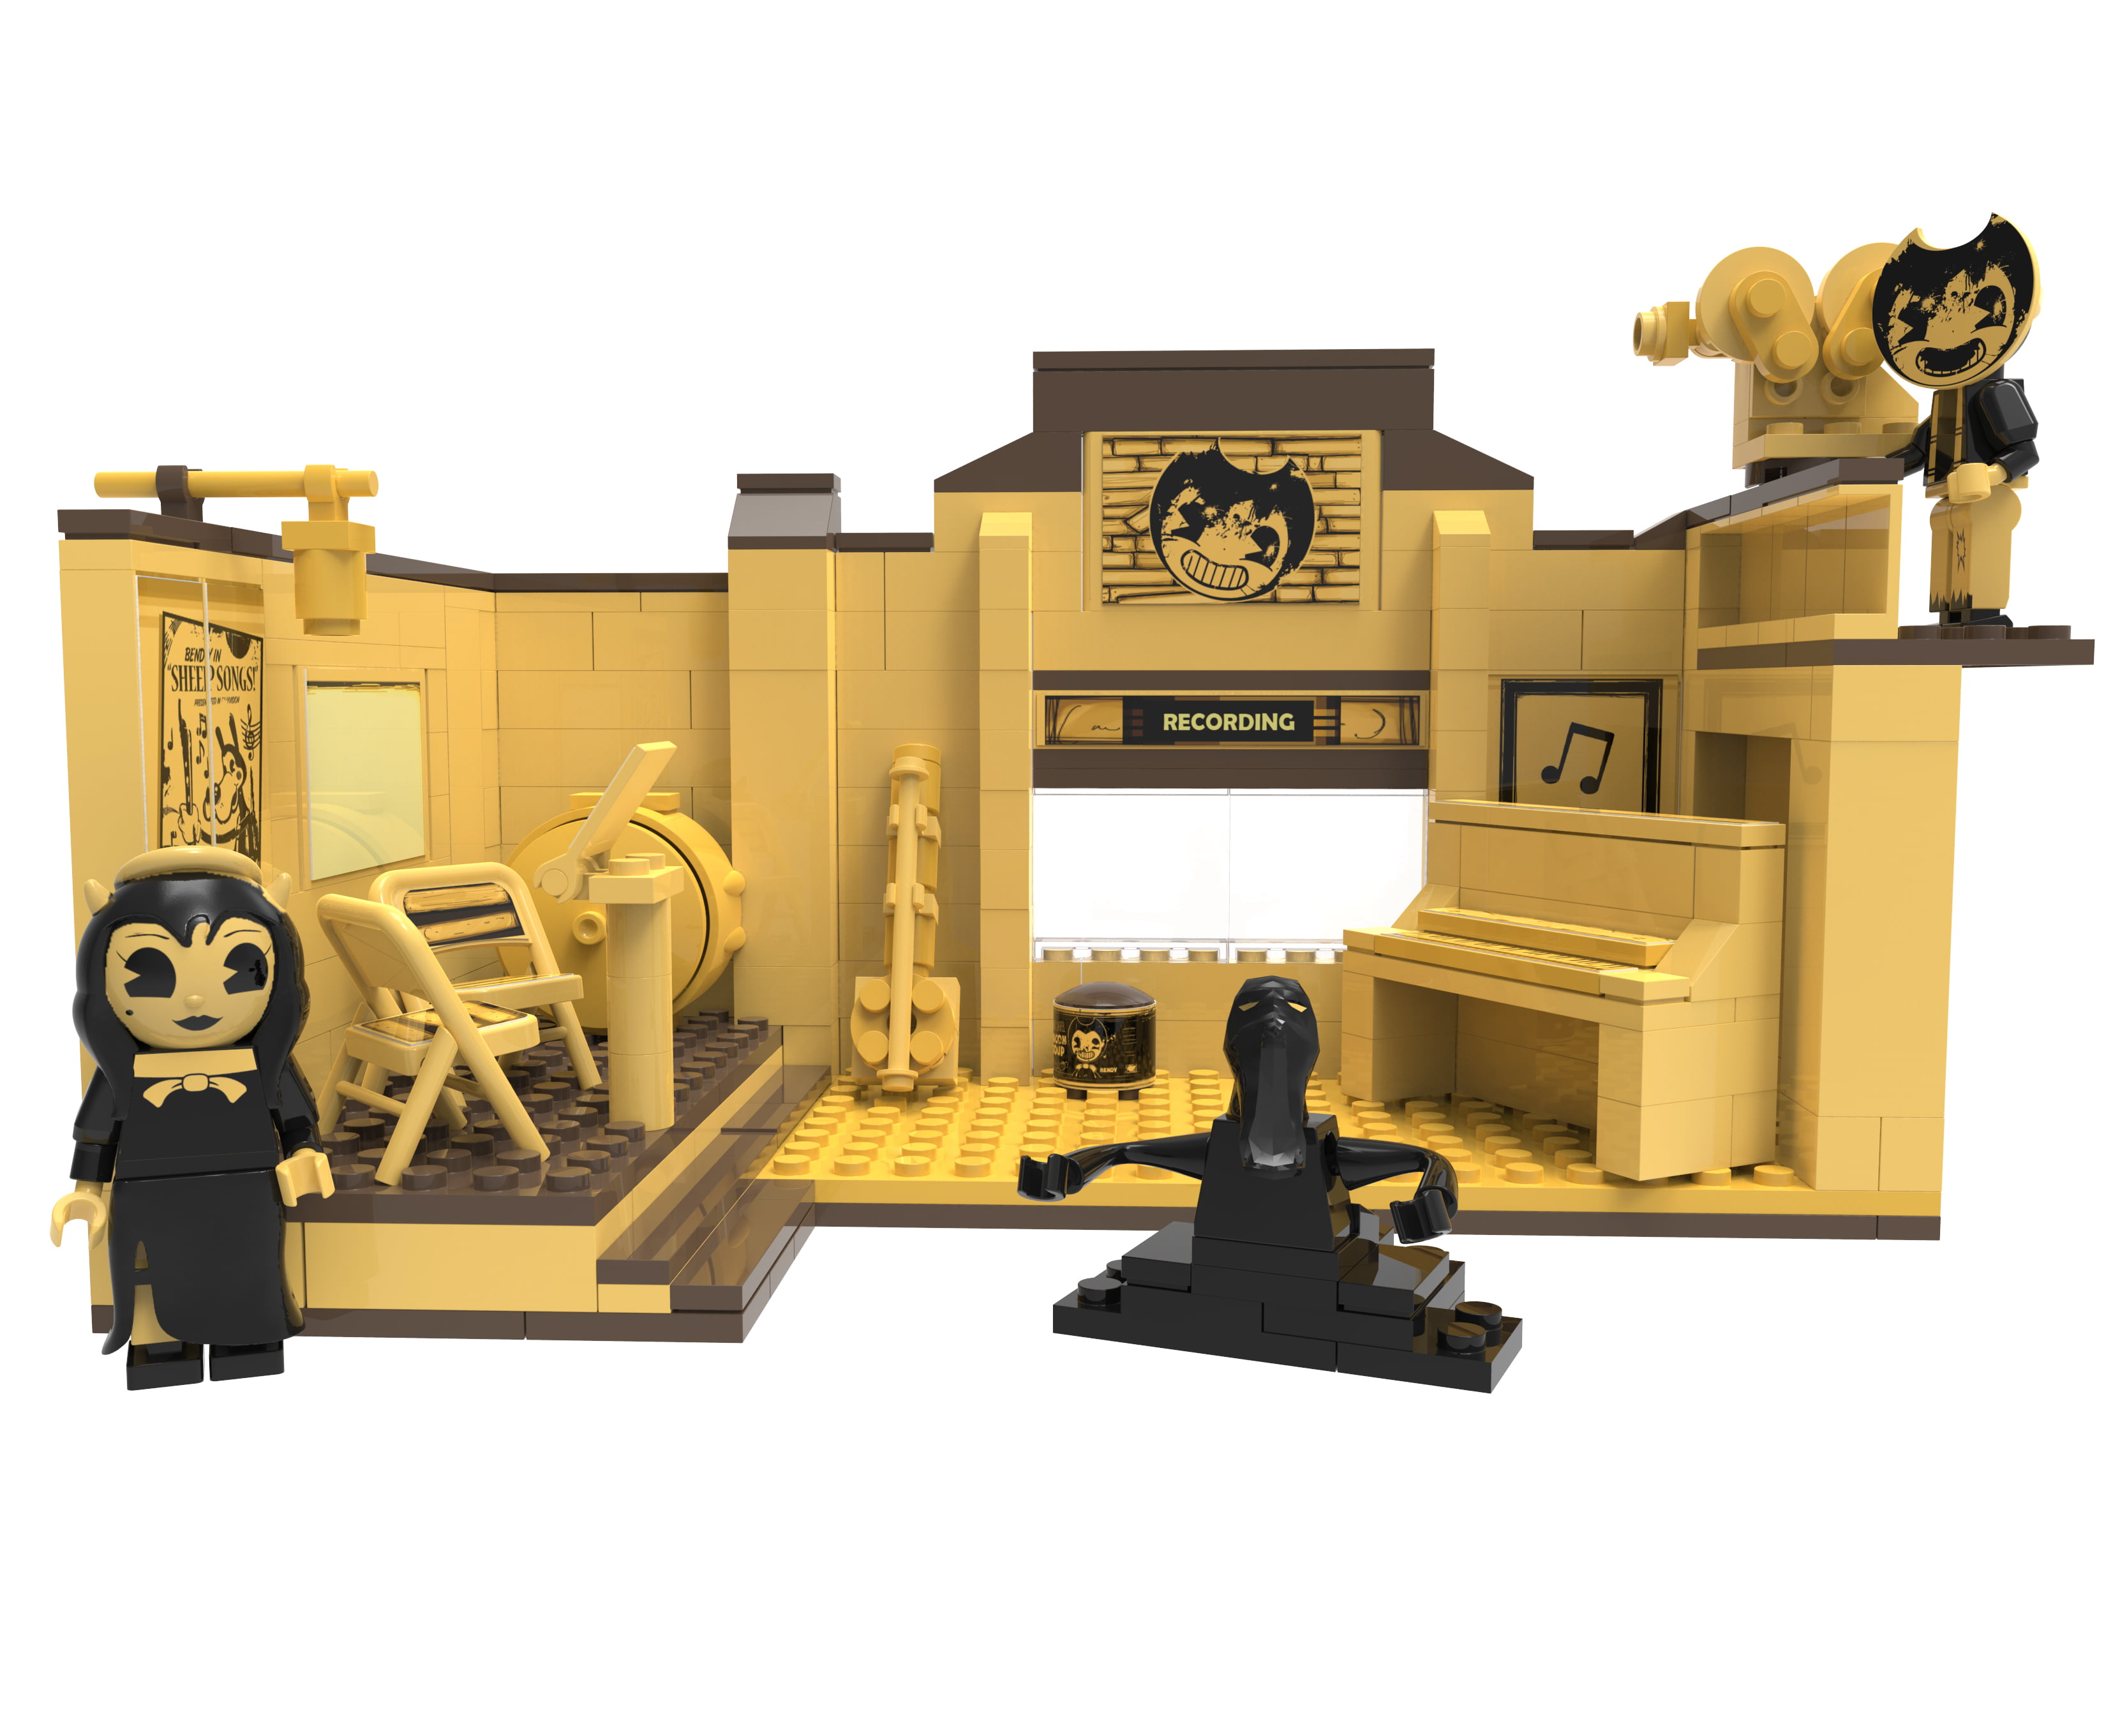 Basic Fun Bendy and The Ink Machine Room Scene Set - 256 Piece for